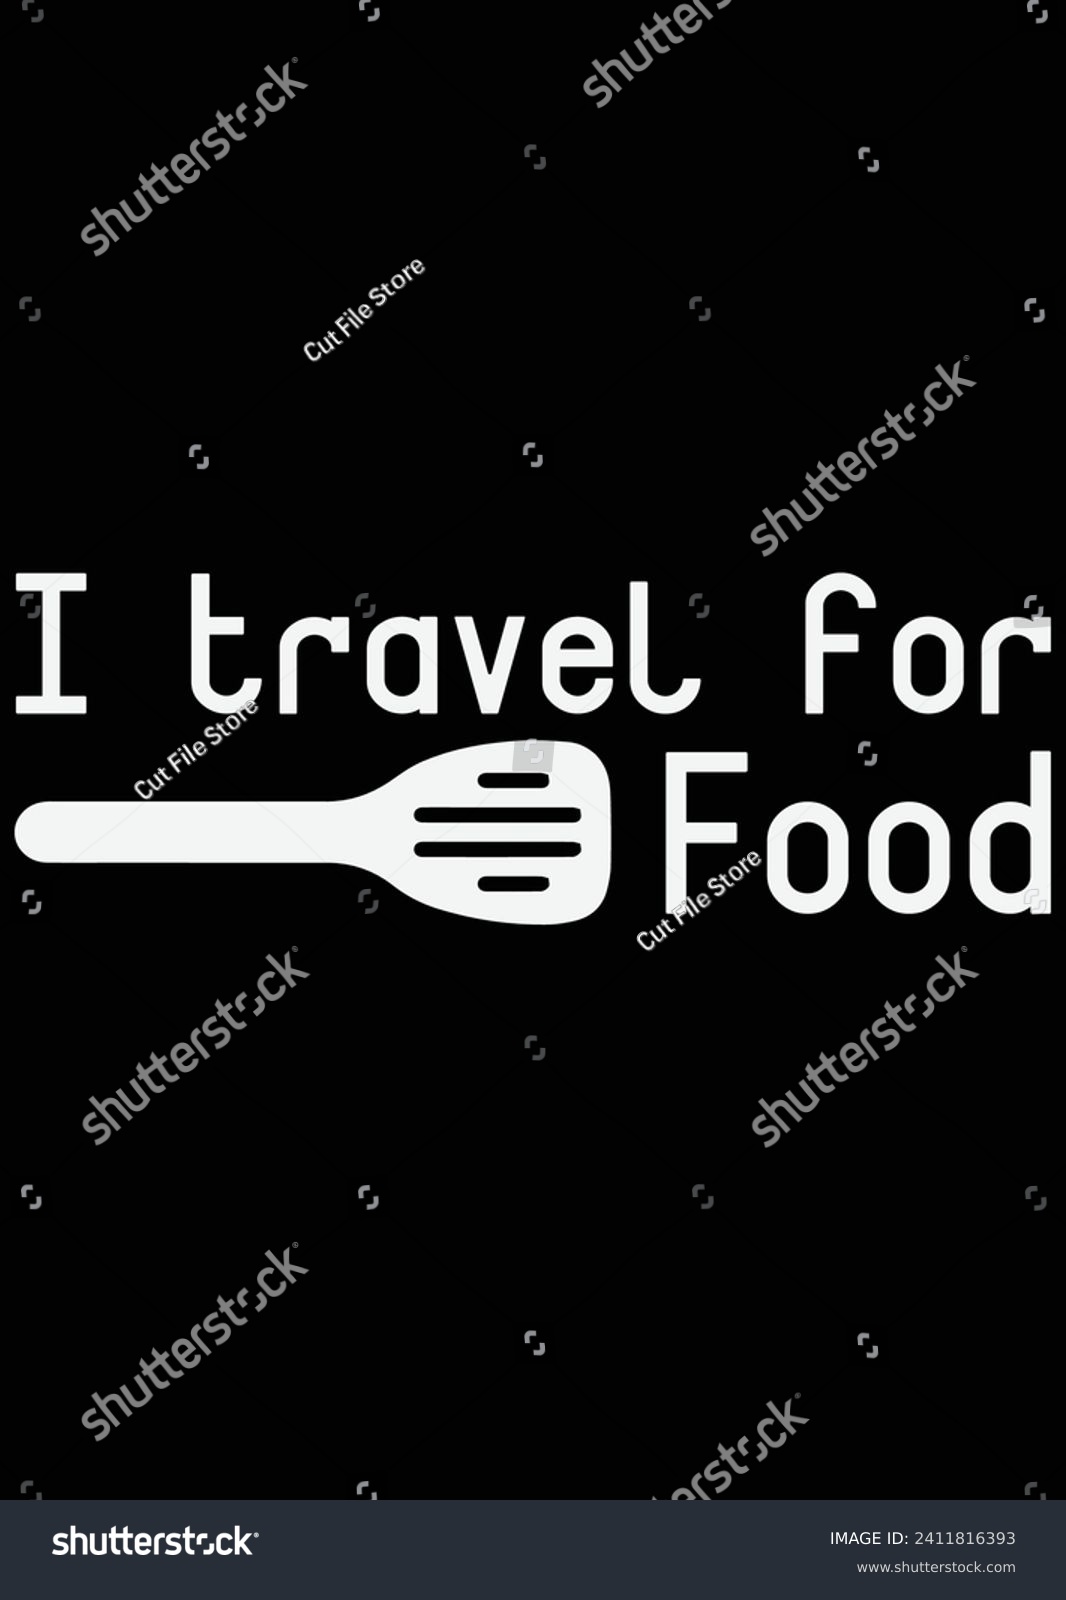 SVG of I Travel For Food eps cut file for cutting machine svg